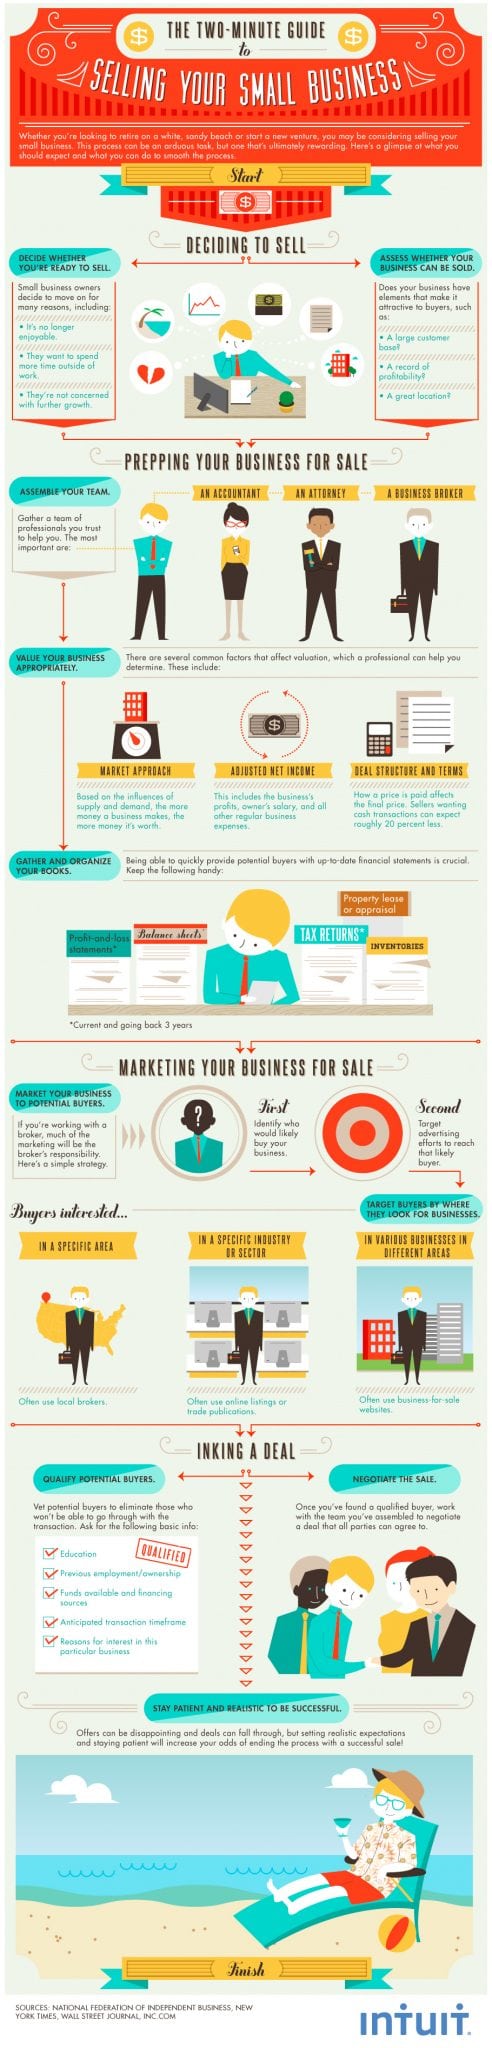 how-to-sell-business-infographic